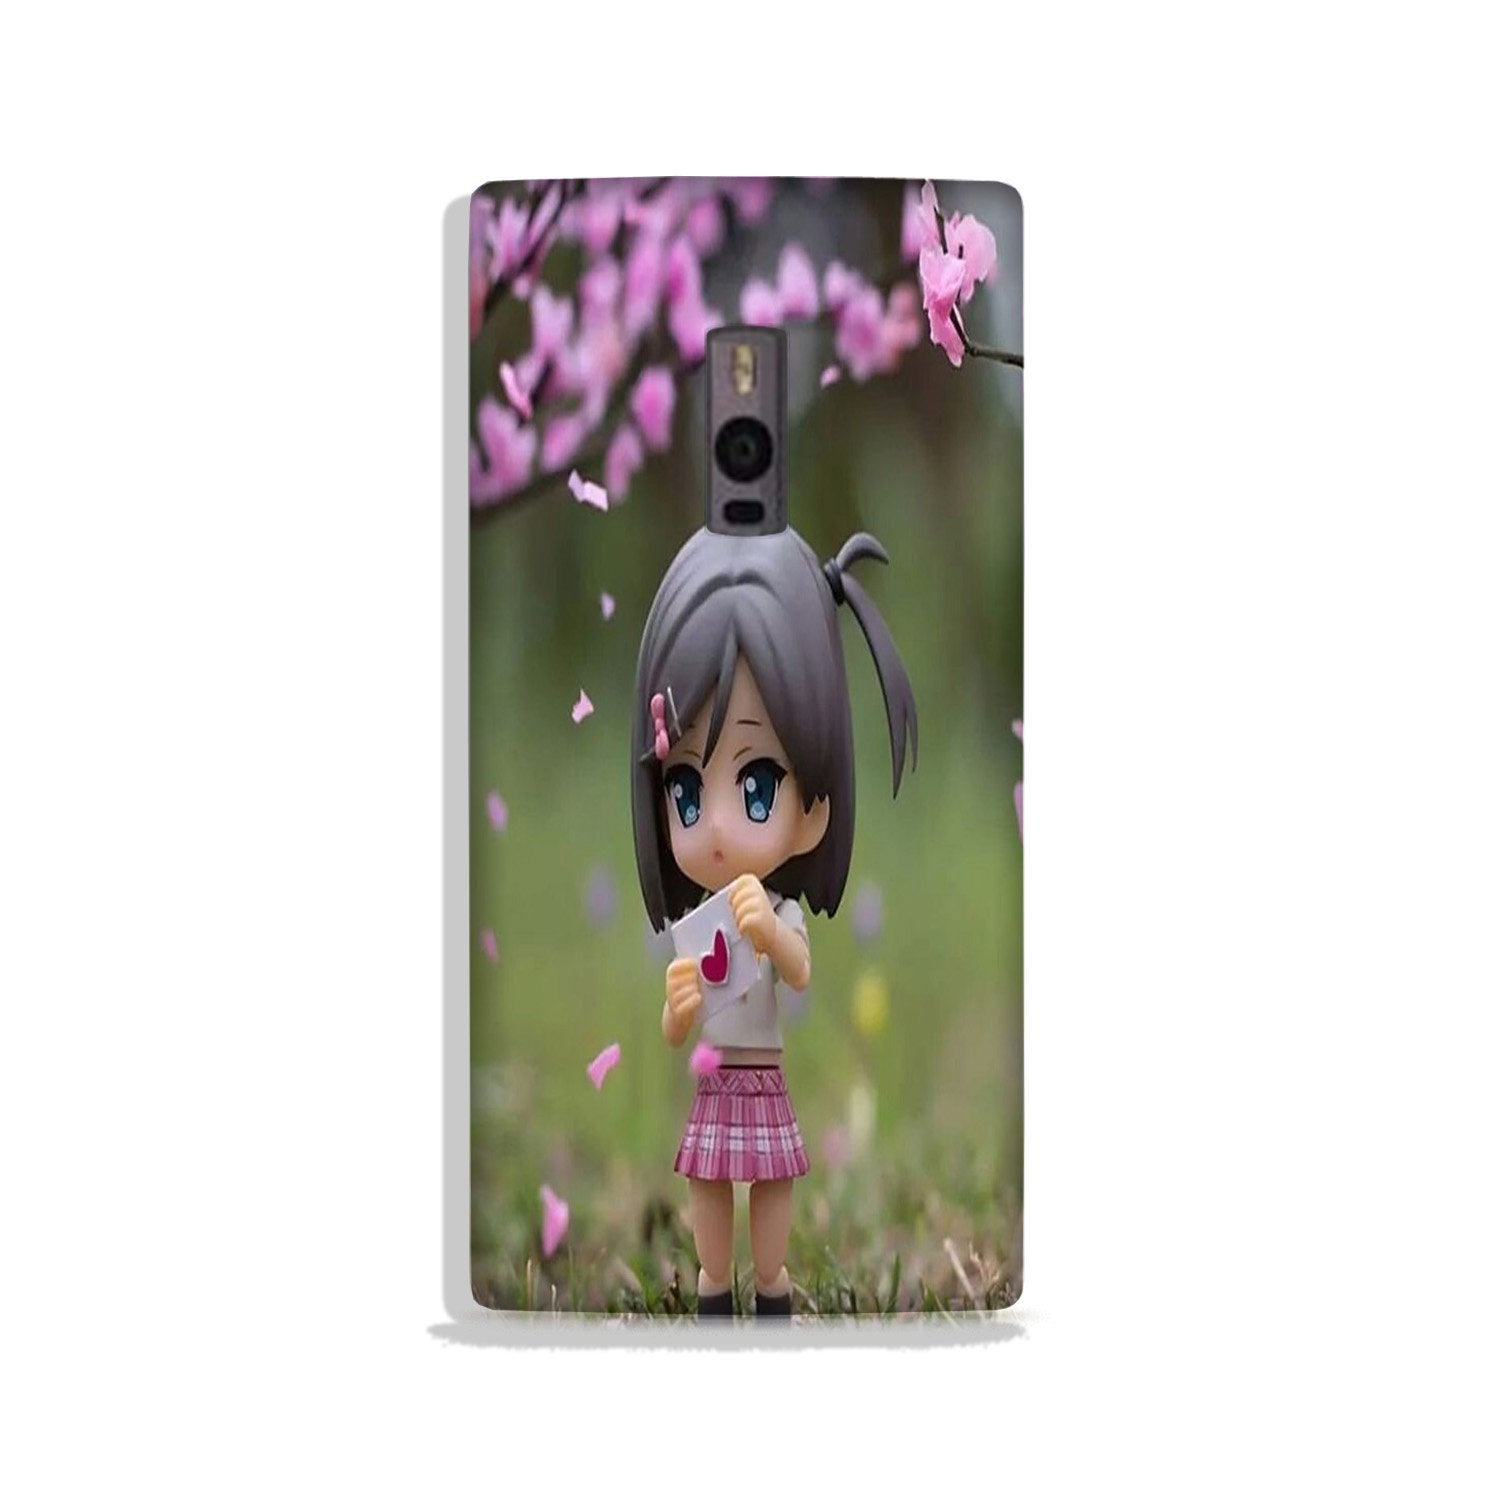 Cute Girl Case for OnePlus 2